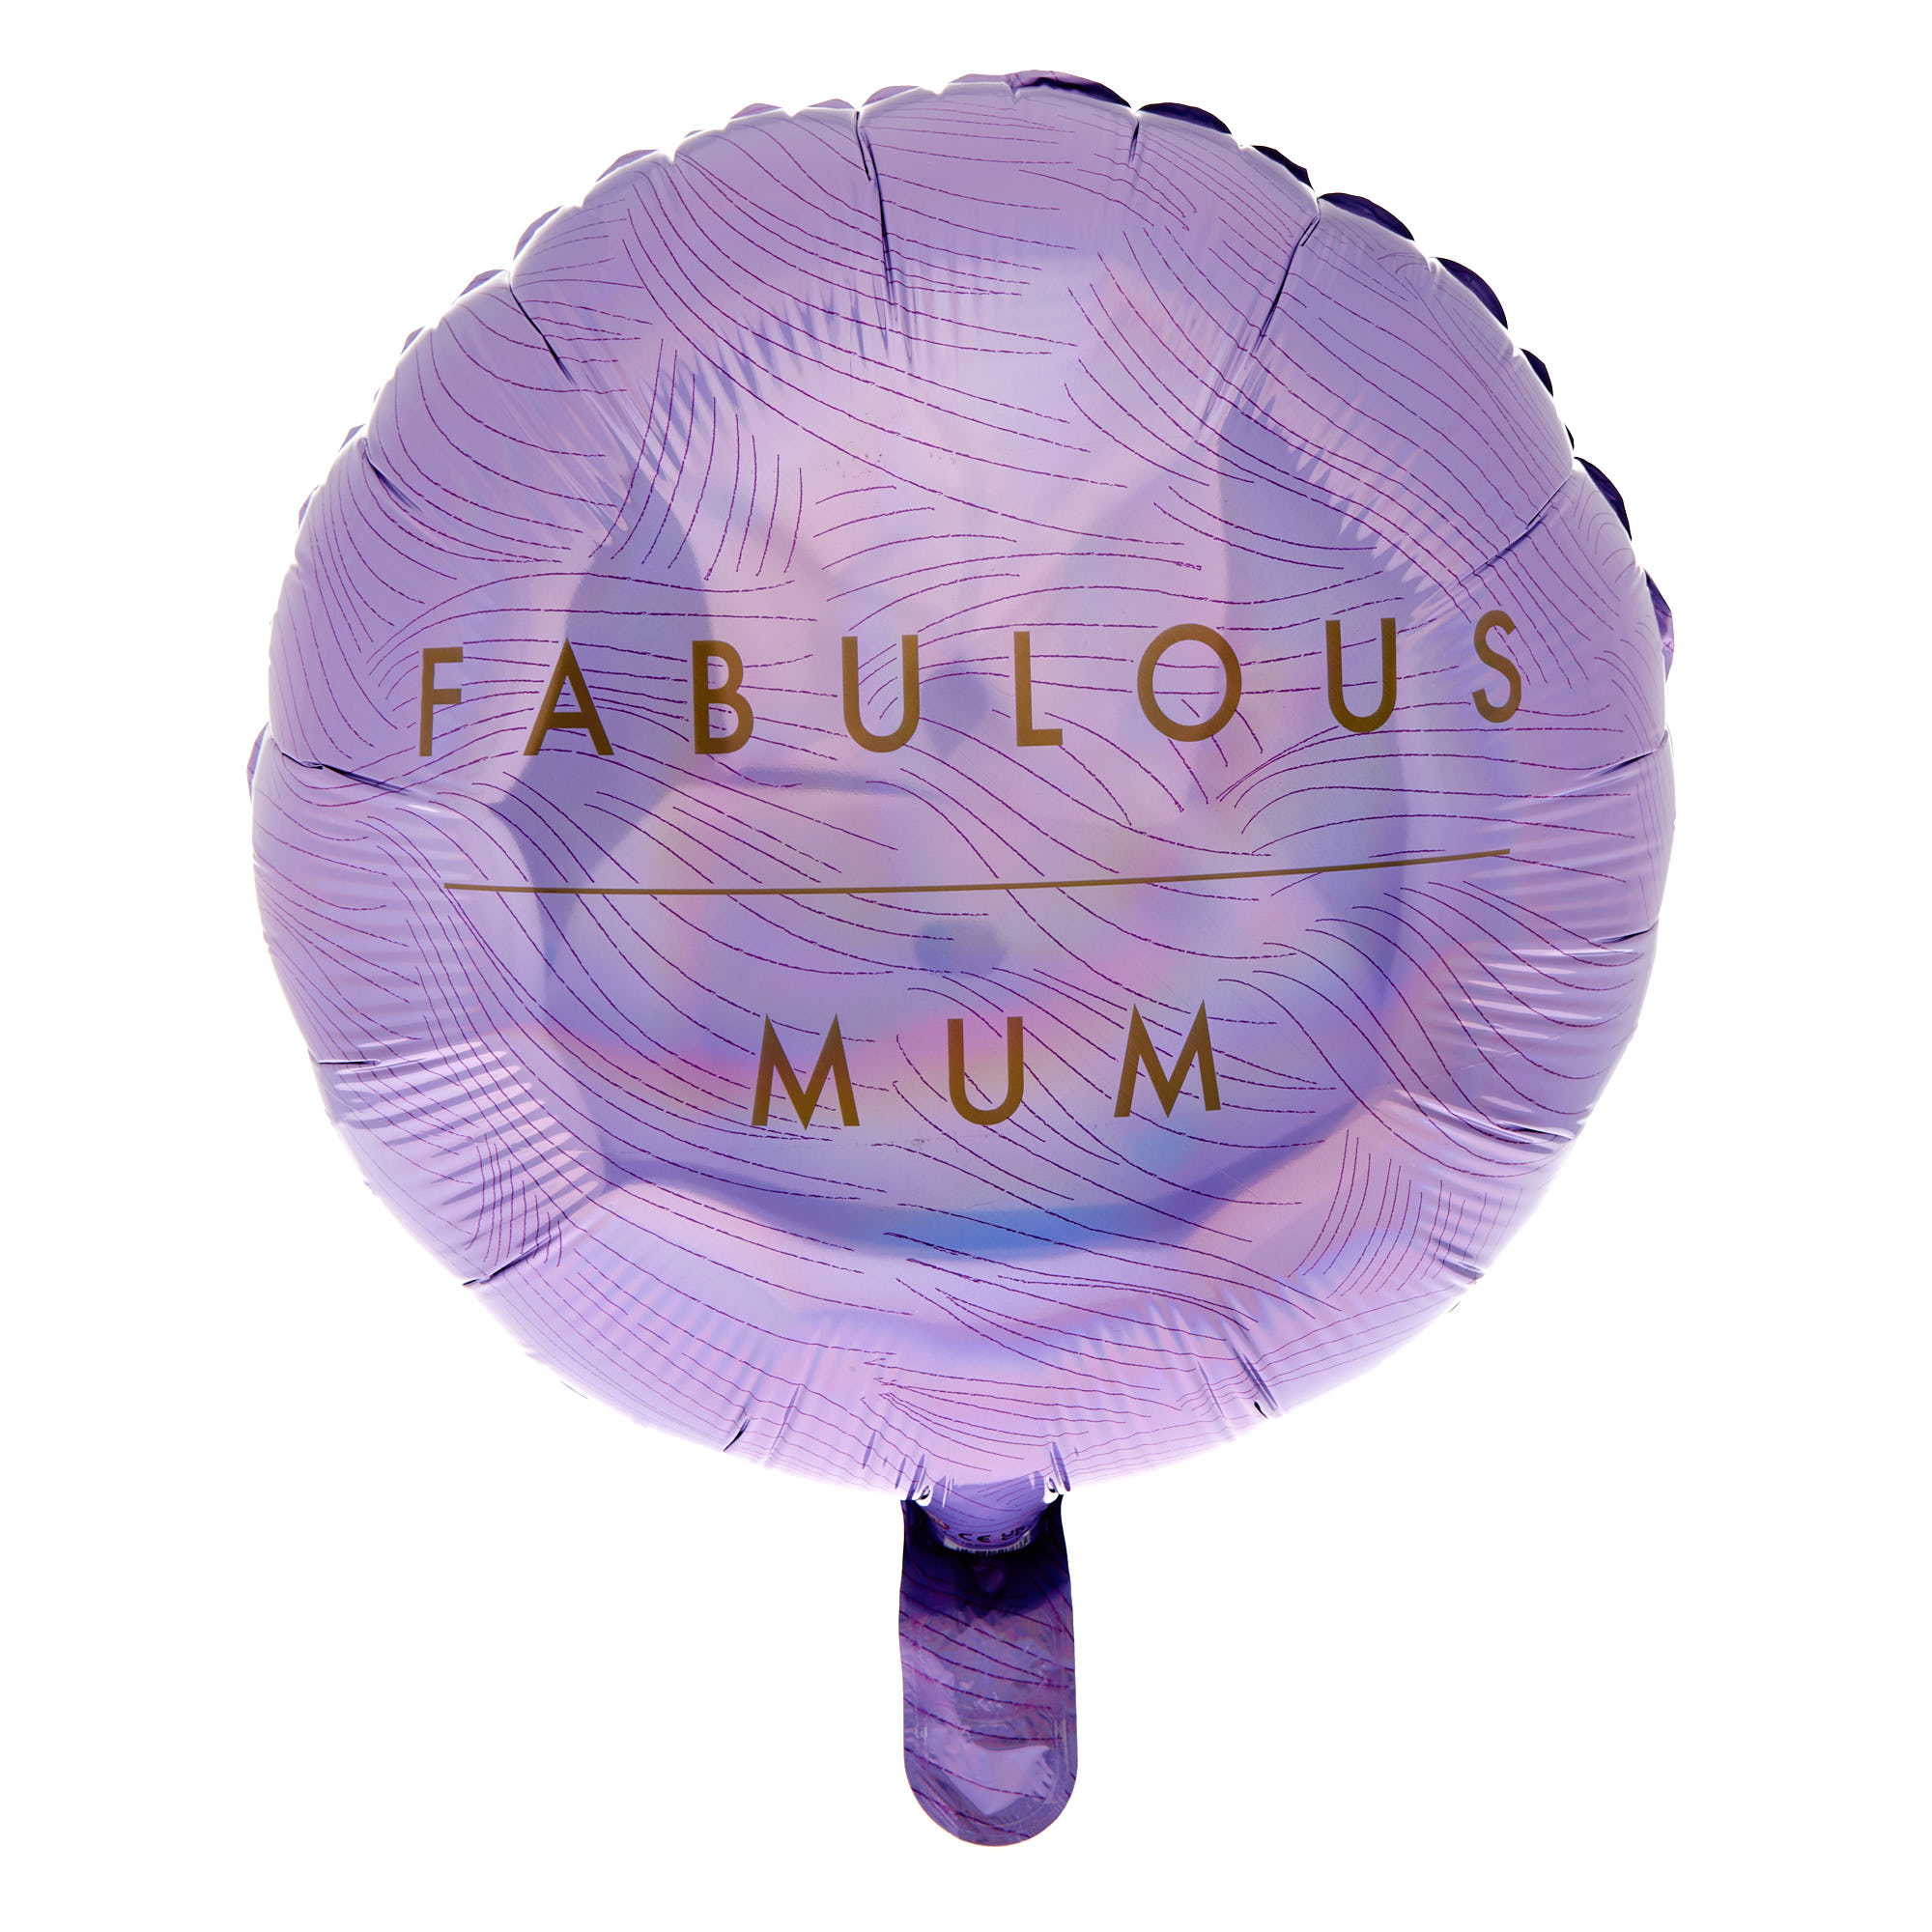 Fabulous Mum Balloon & Lindt Chocolates - Pre-Order For Mother's Day!